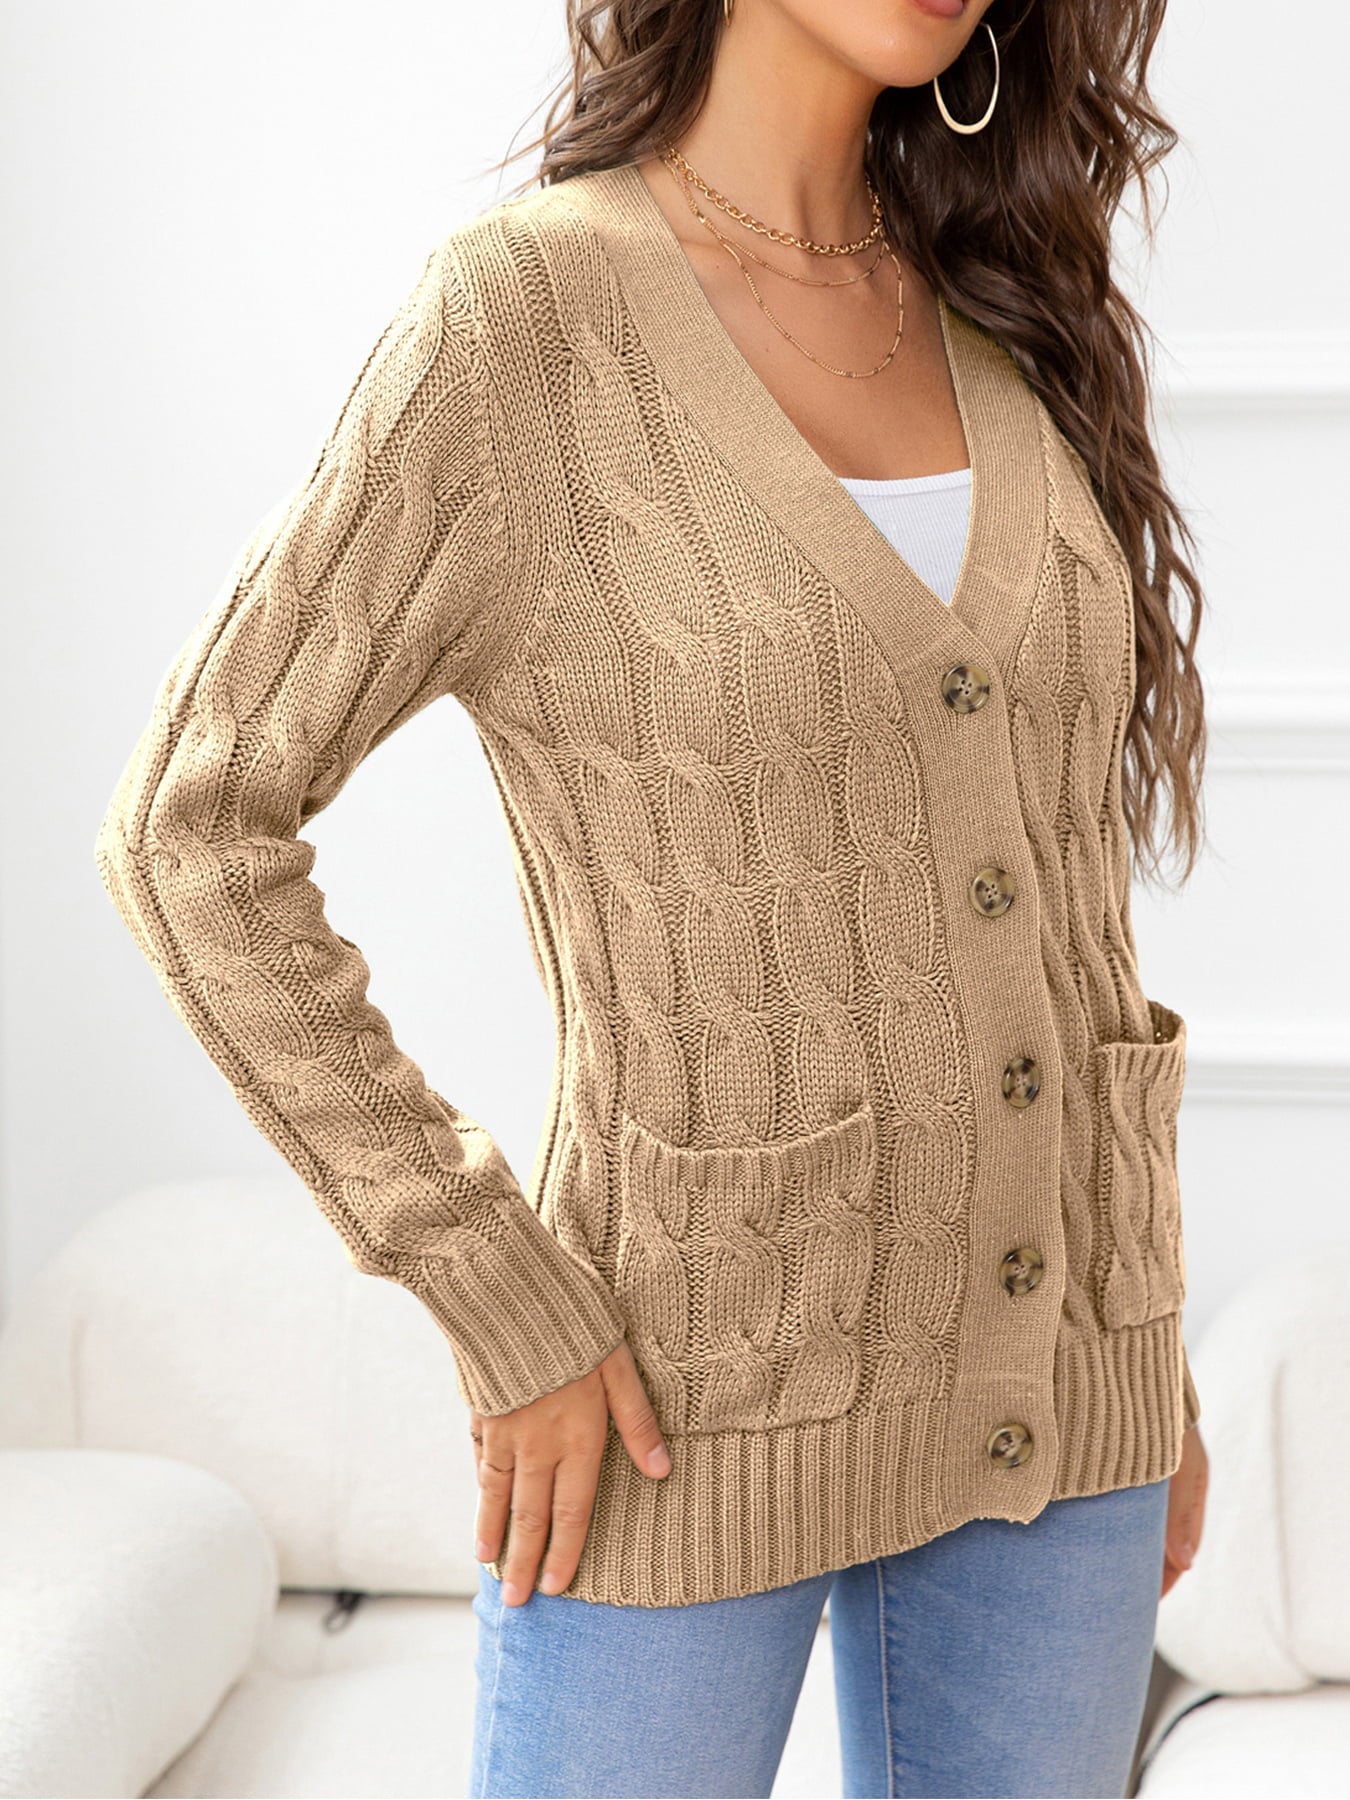 Button Down Cable-Knit Cardigan - Women’s Clothing & Accessories - Shirts & Tops - 26 - 2024